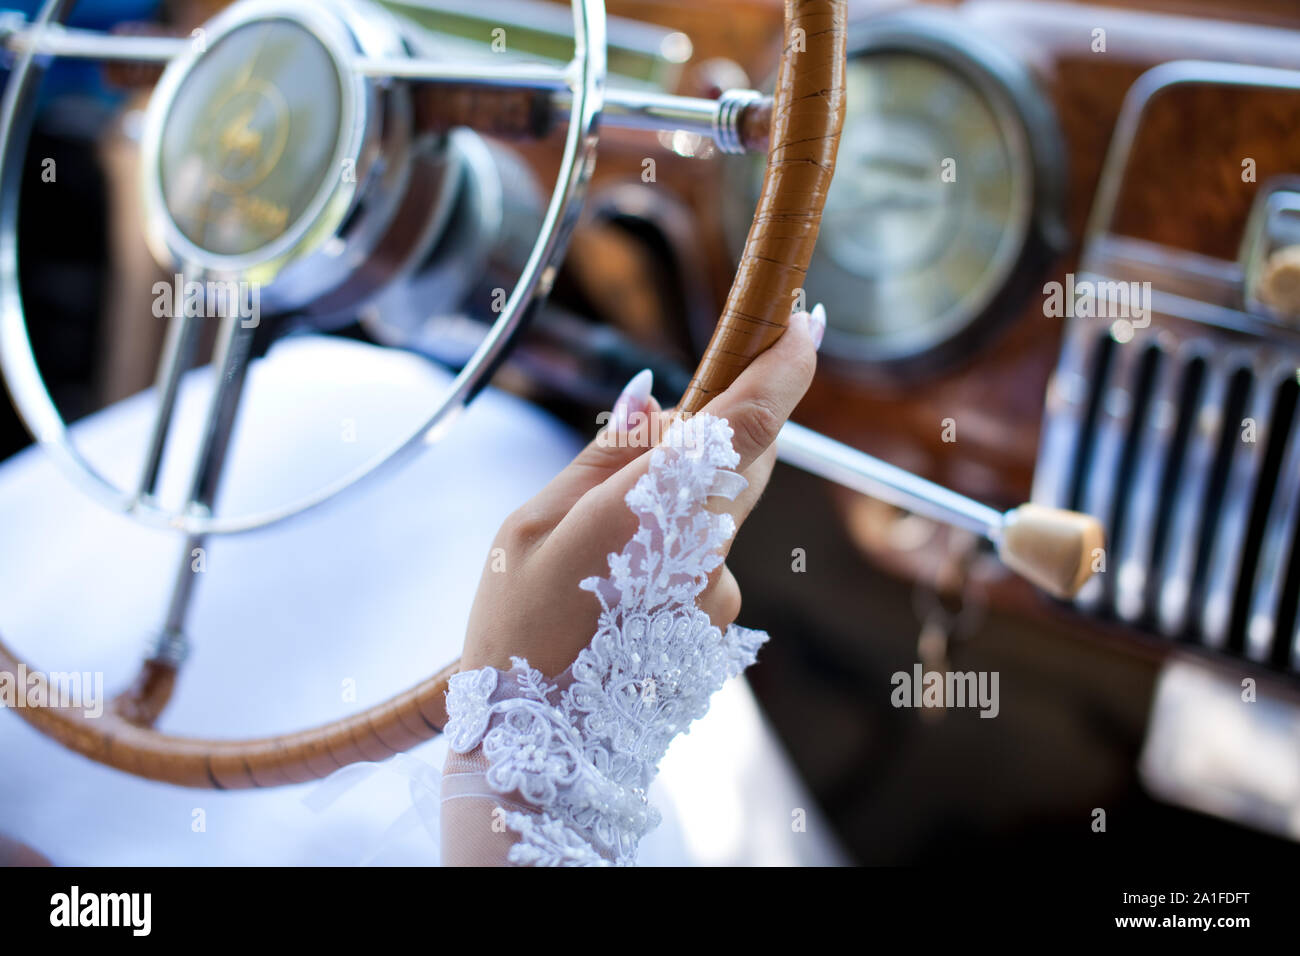 The brides hand is on the steering wheel of a retro car. Stock Photo